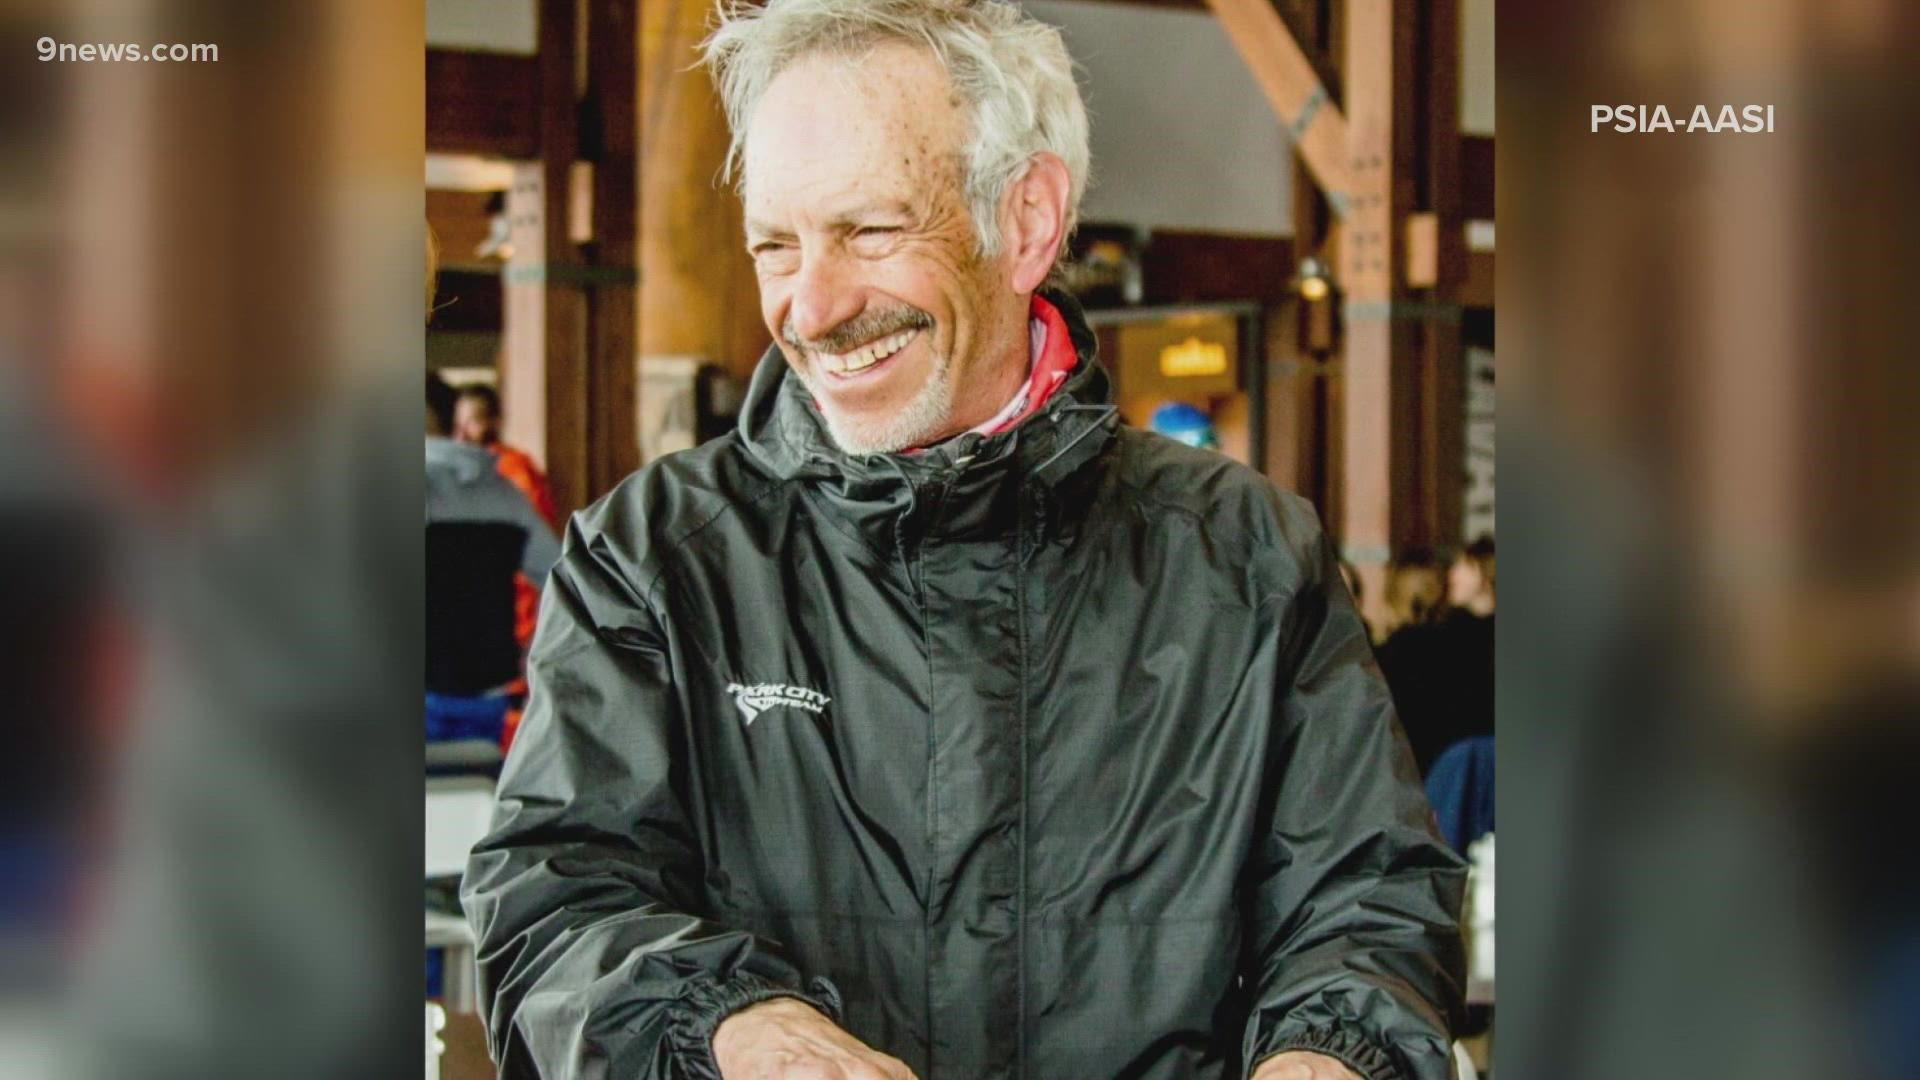 Ron LeMaster was the author of books and articles about skiing and was a coach, ski school trainer and photographer.